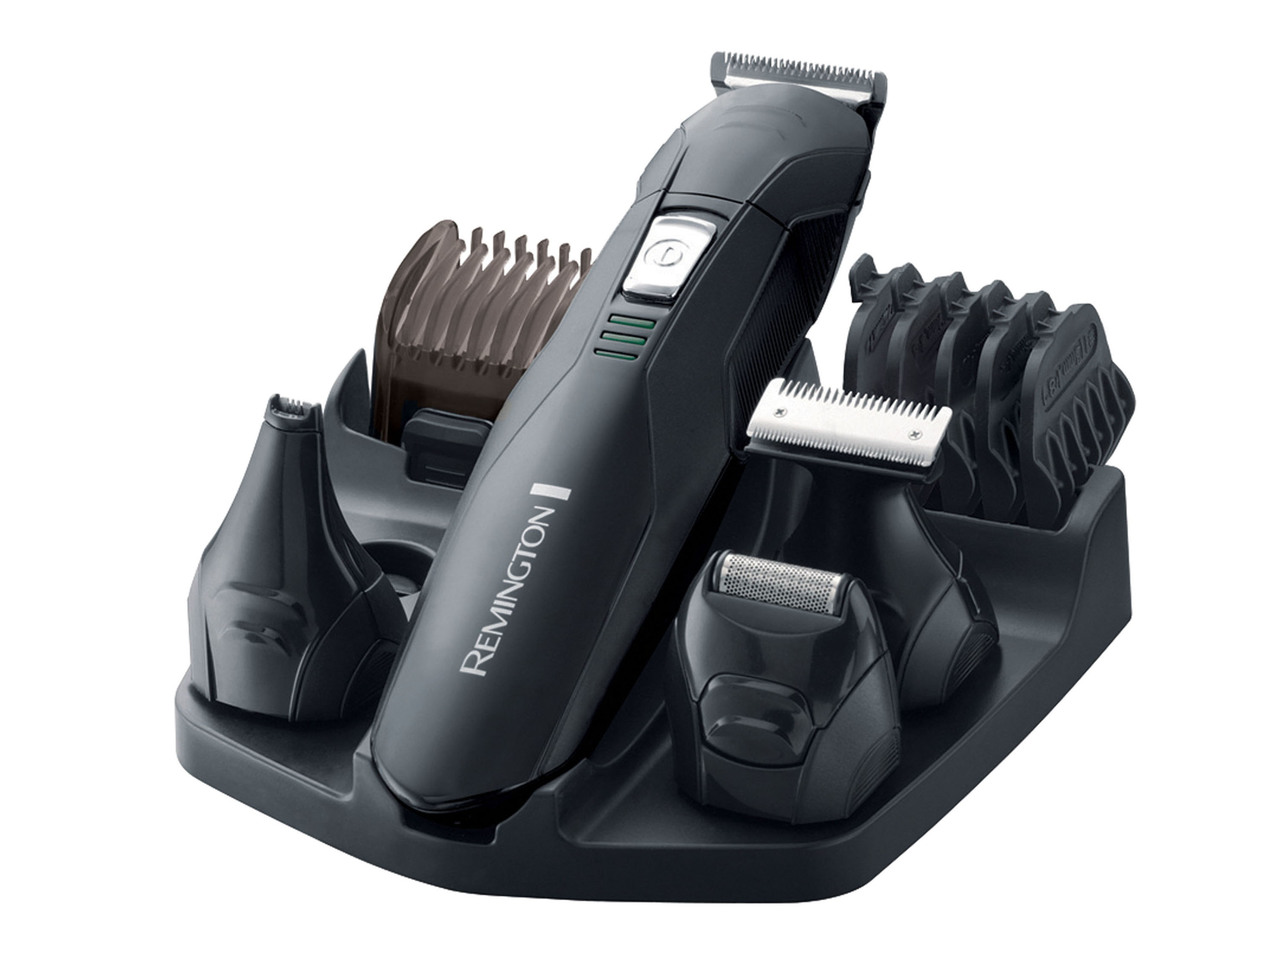 "All in One" Cordless Shaver